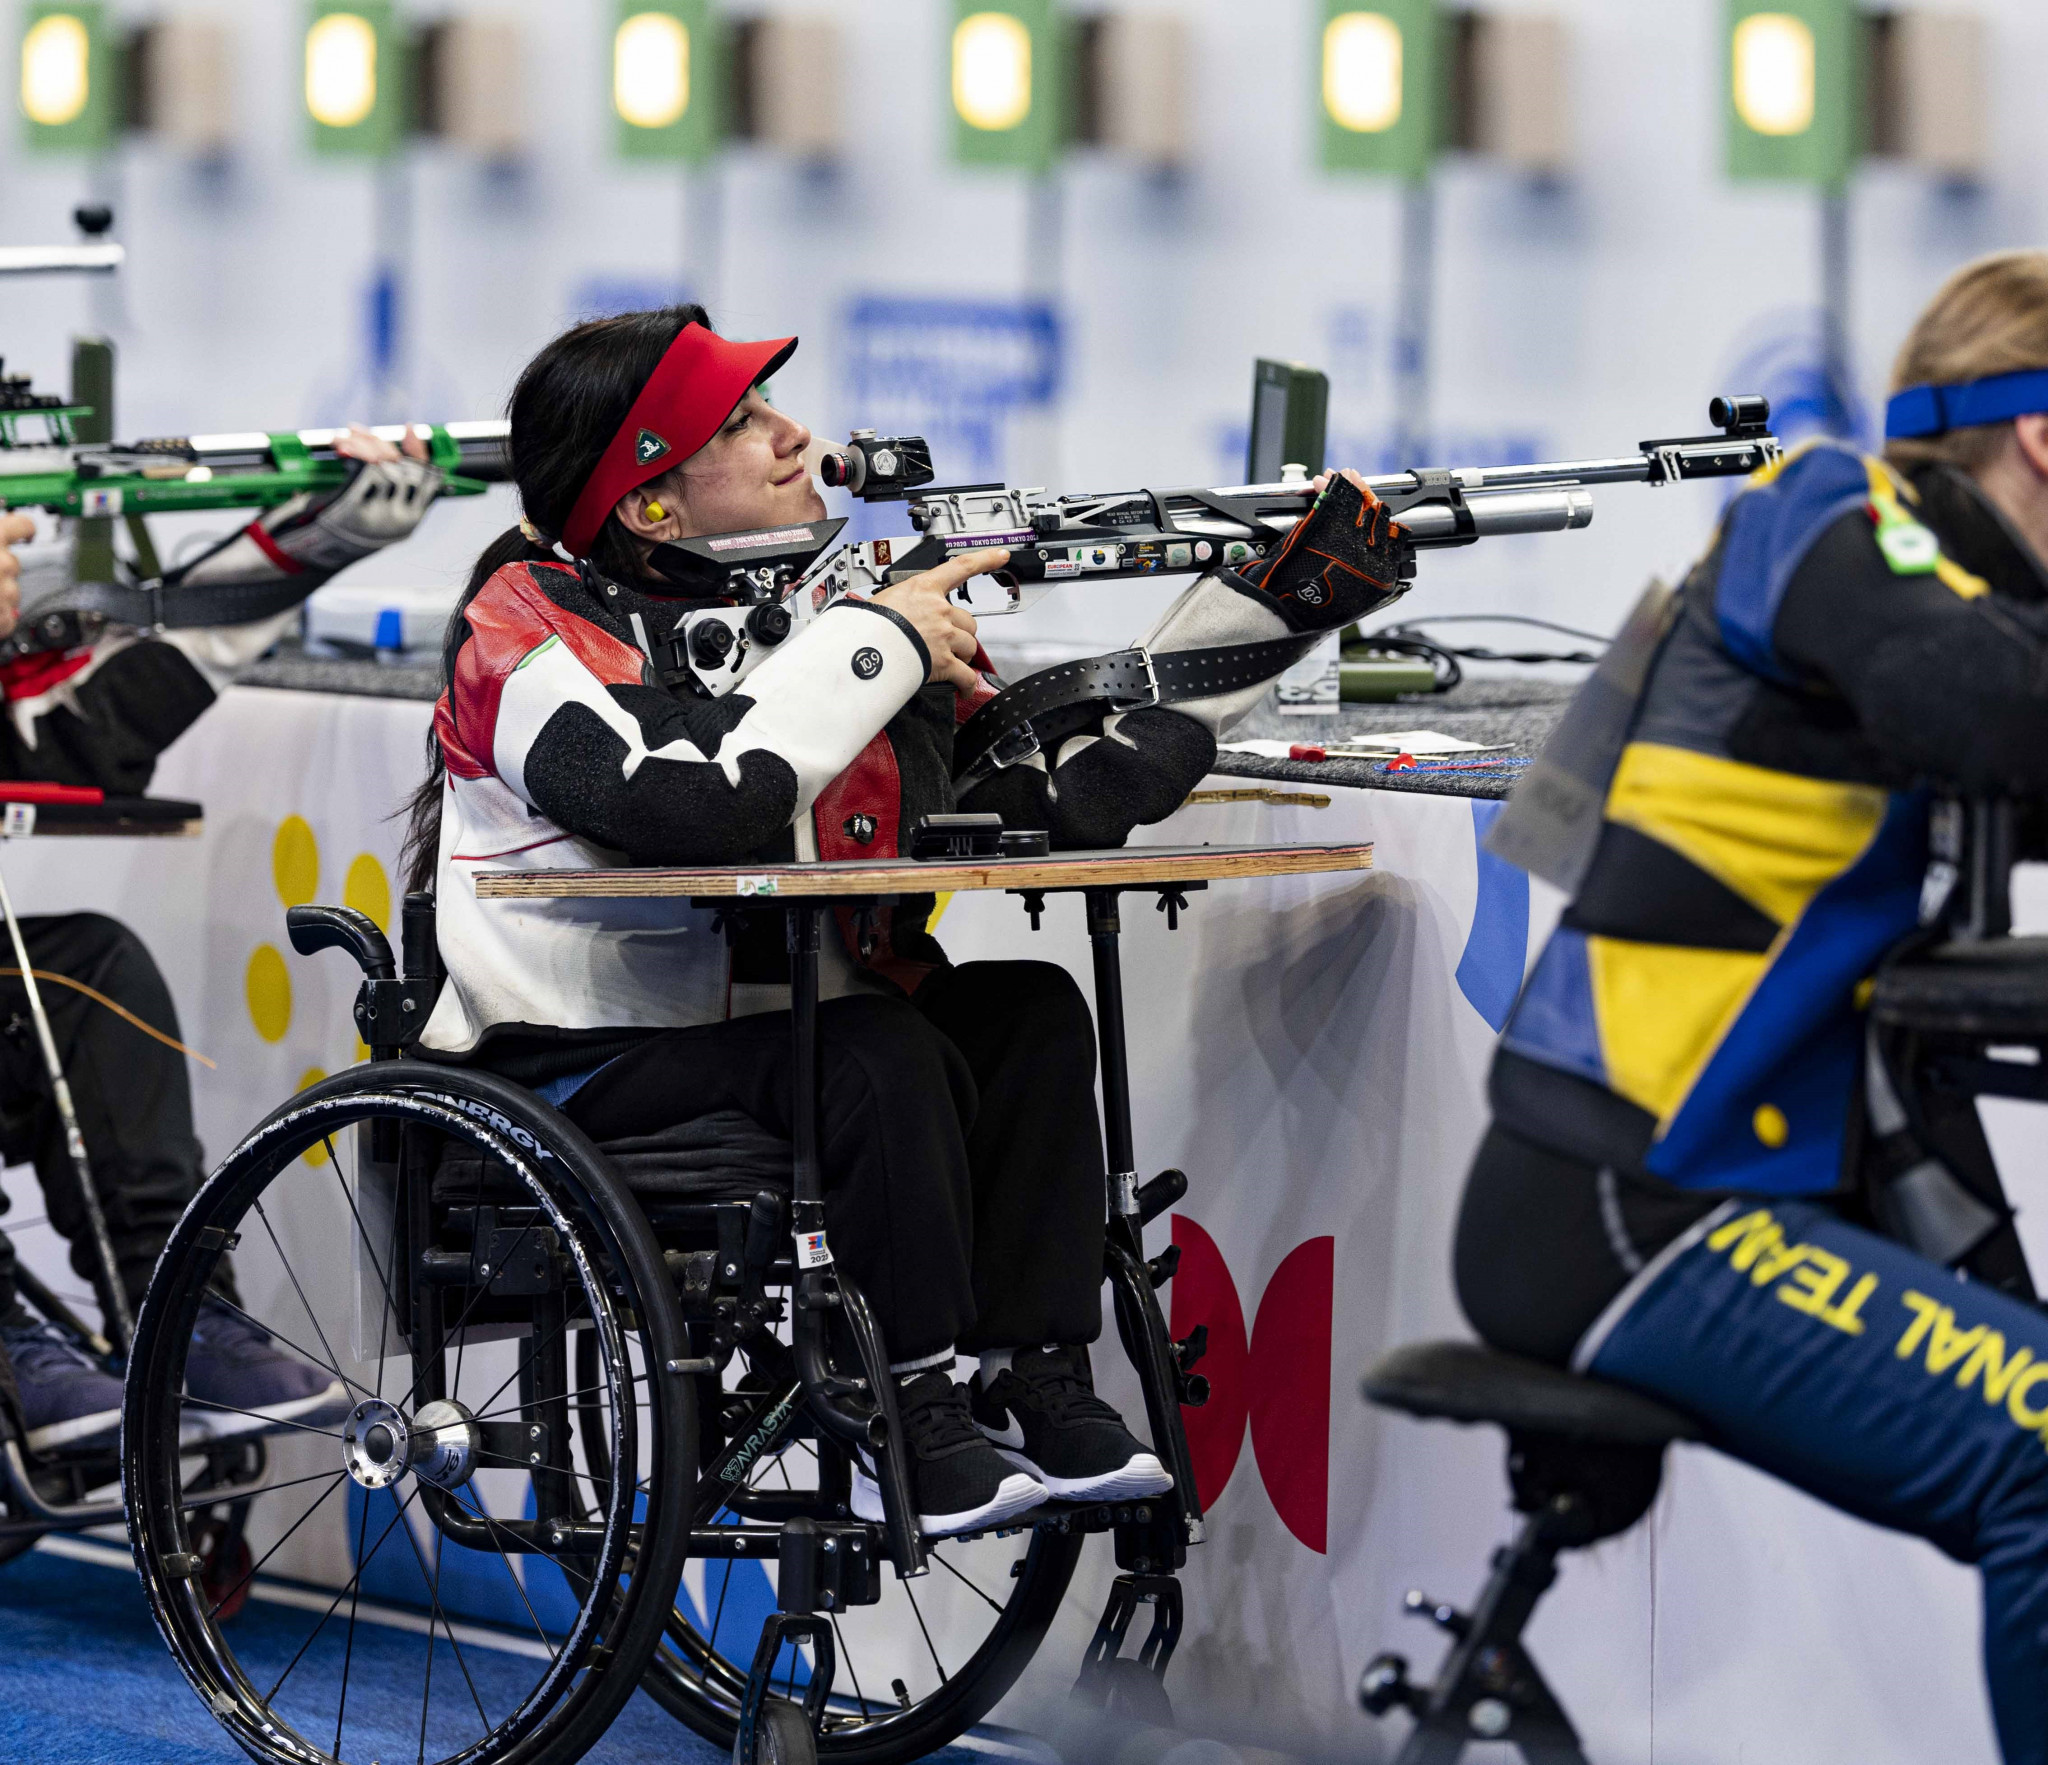 Two more sets of medals were handed out on the second day of shooting Para sport competition ©EPC